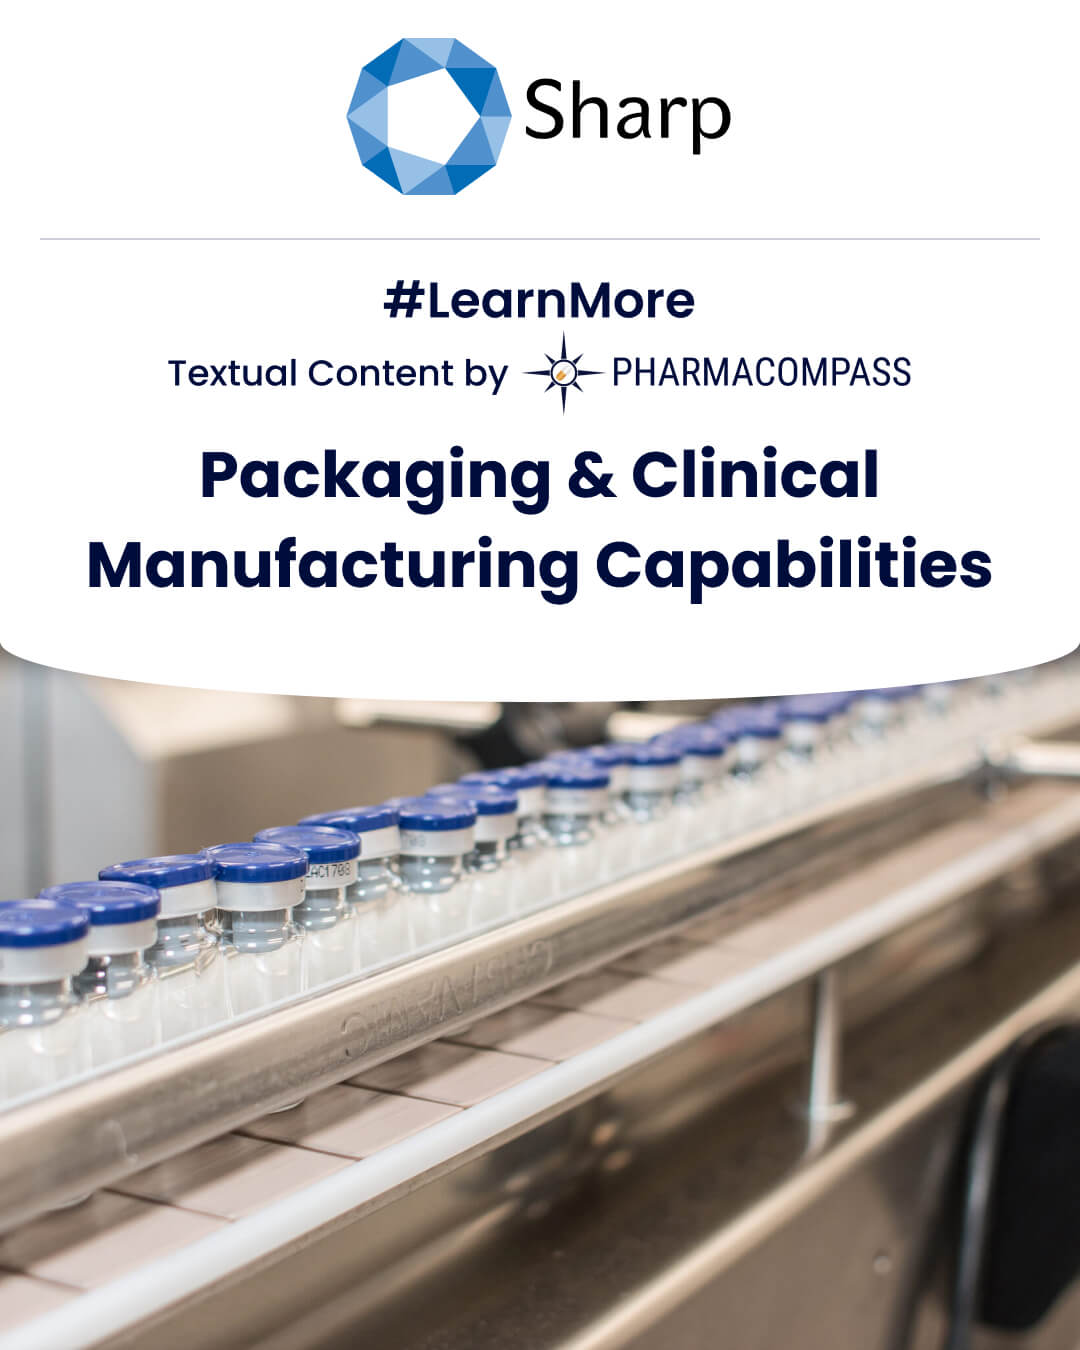 View Sharp`s clinical trial supply & contract pharmaceutical packaging services, including blisters, bottles, sachets, pouches & PFS on PharmaCompass.